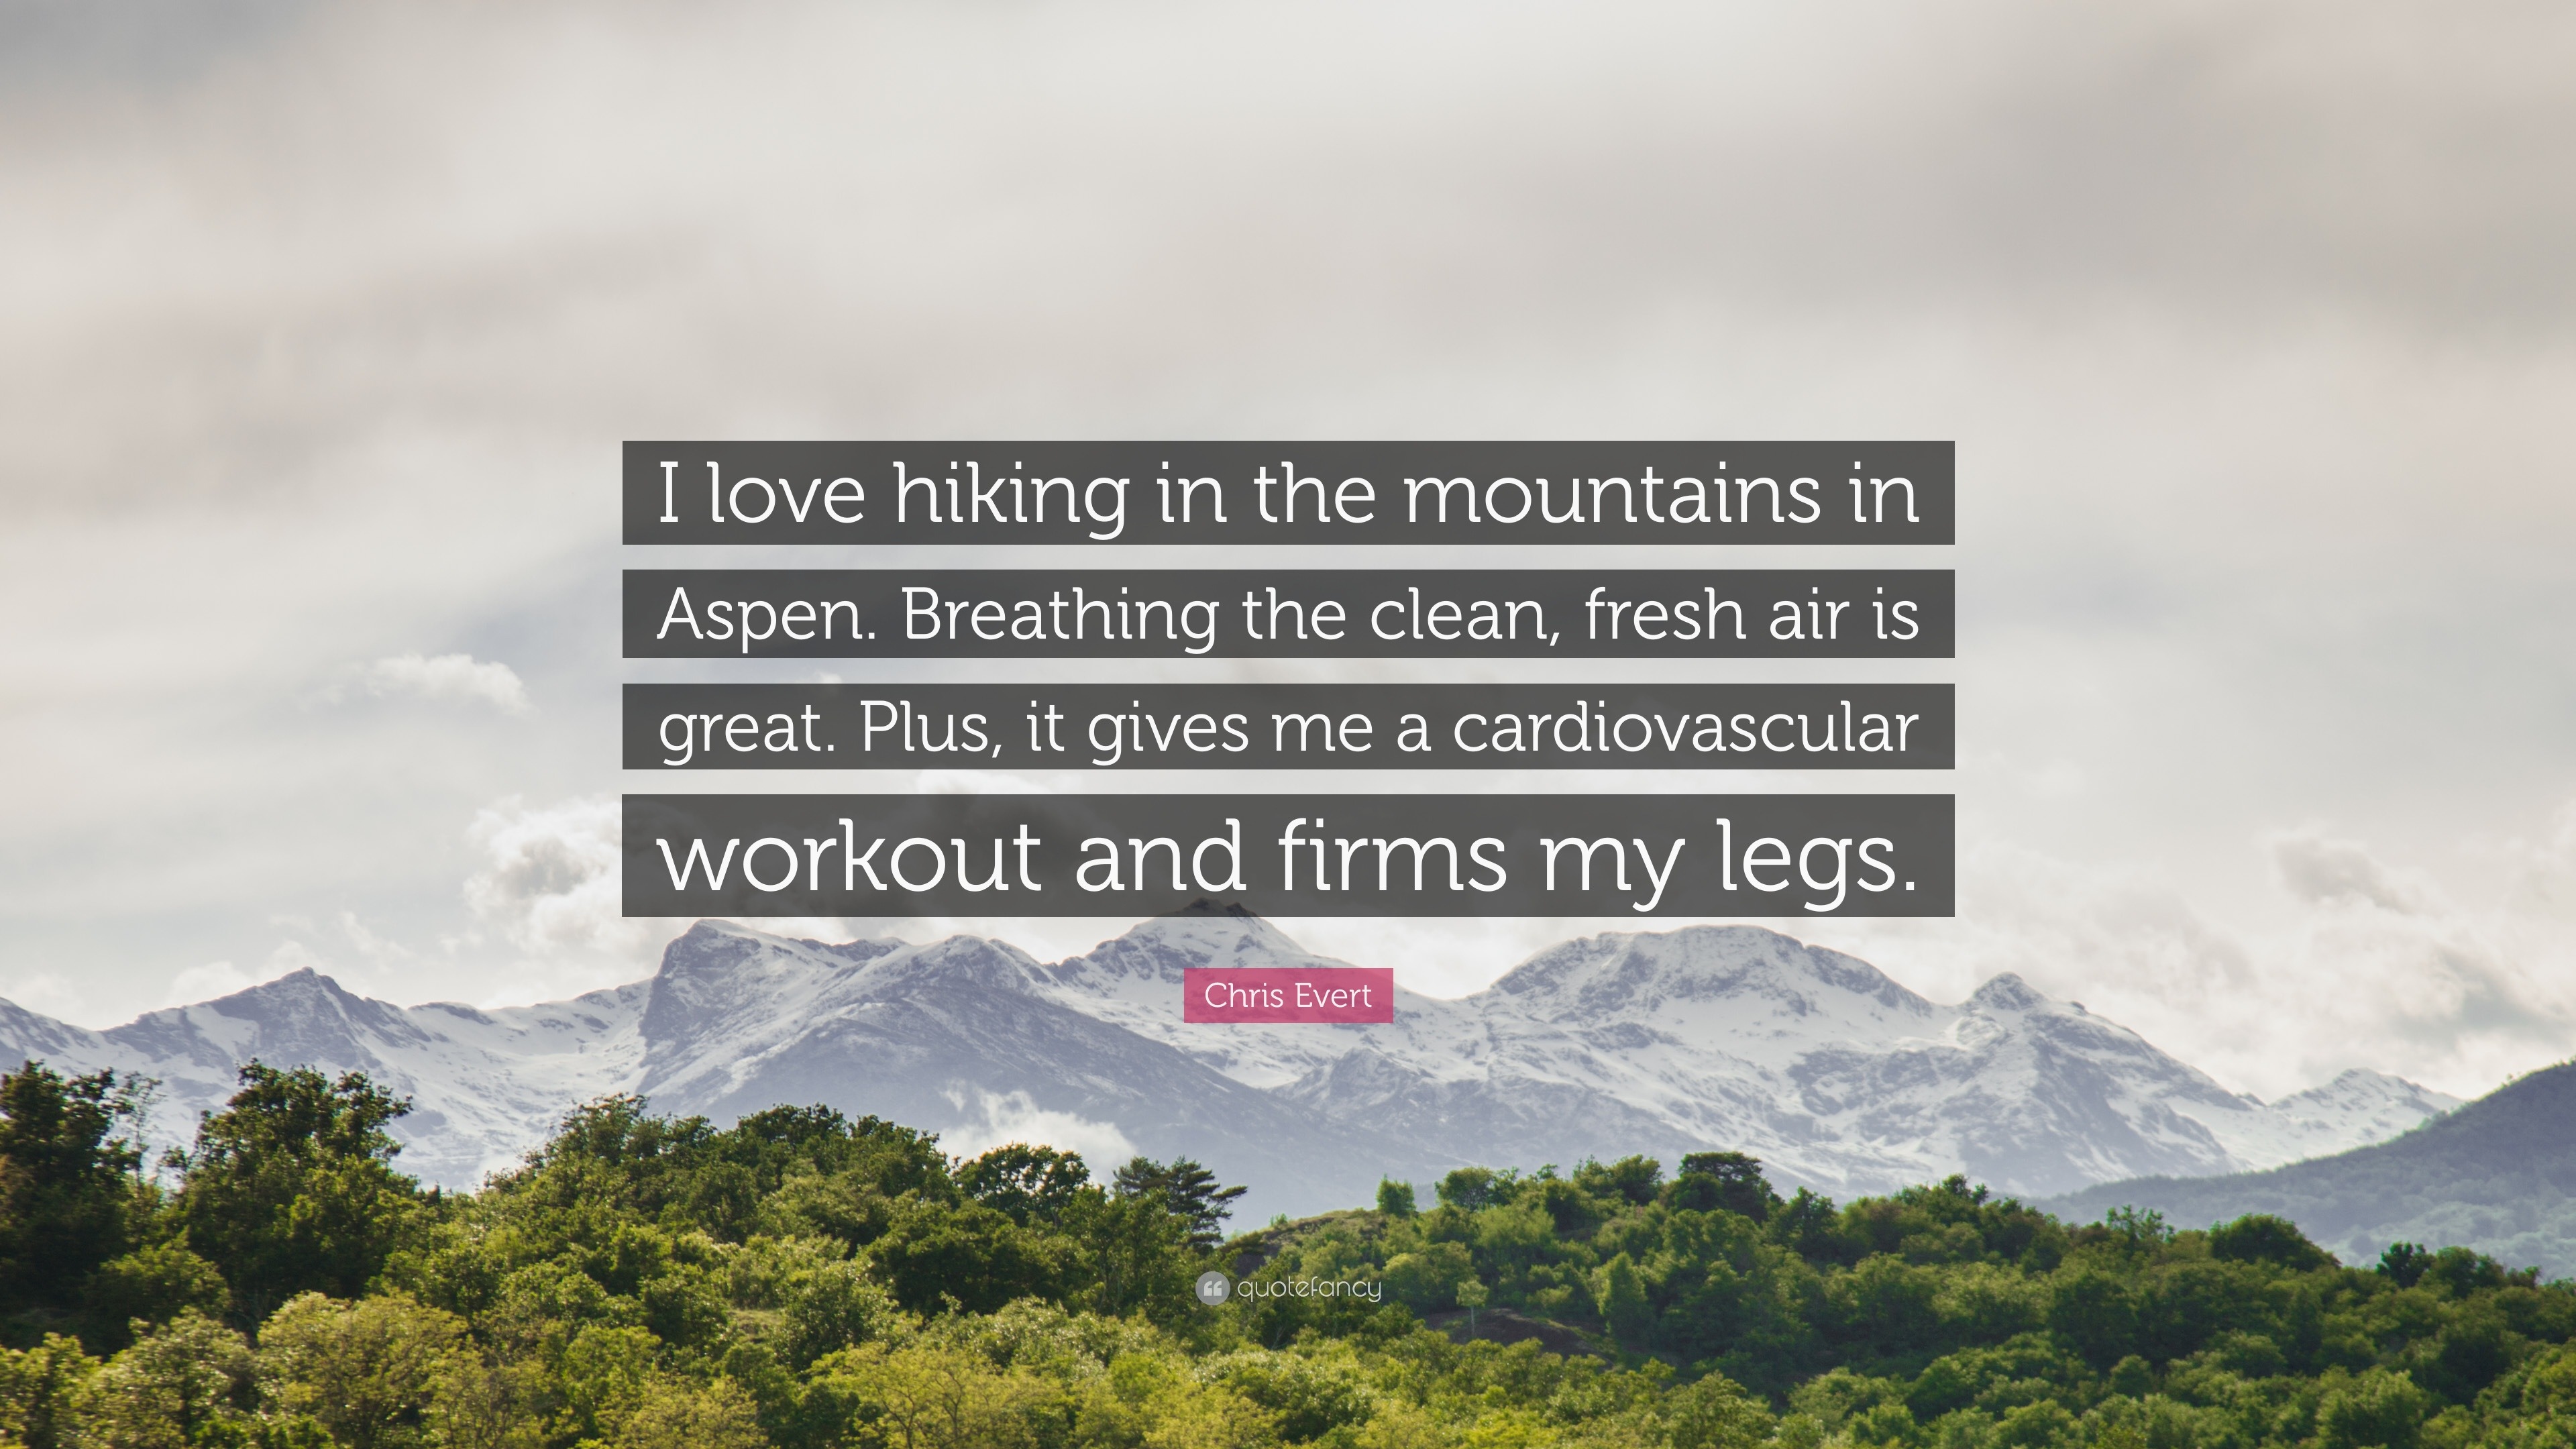 Chris Evert Quote I Love Hiking In The Mountains In Aspen Breathing The Clean Fresh Air Is Great Plus It Gives Me A Cardiovascular Wor